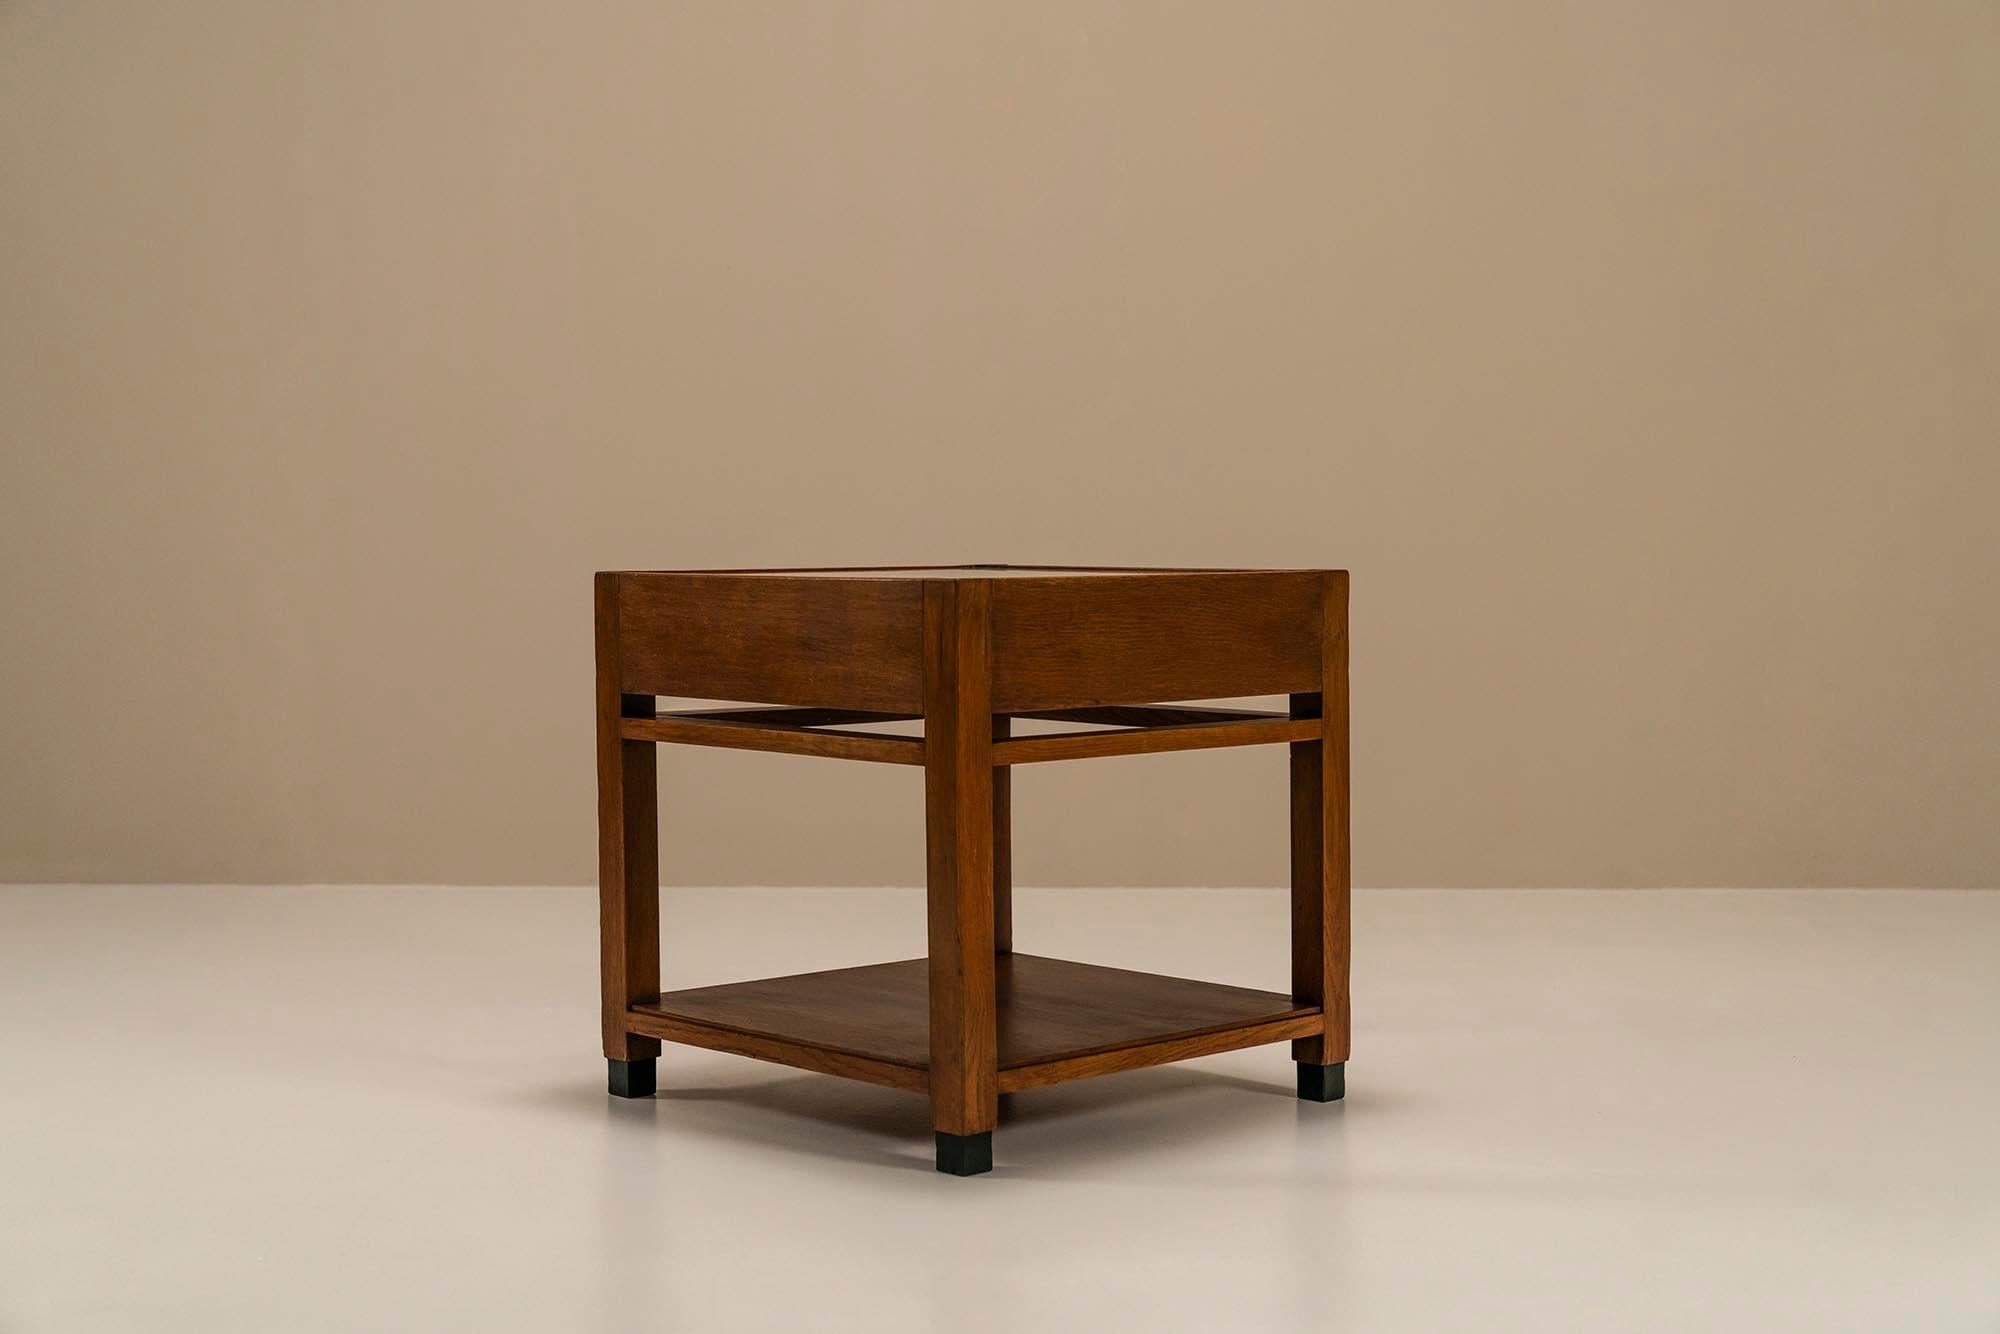 The Hague School square coffee table in oak.This coffee table has a sleek and rectangular design that captures the essence of the Hague School. It is purely about cubist shapes and clean lines and bring about a feeling of luxury.Frank Lloyd Wright